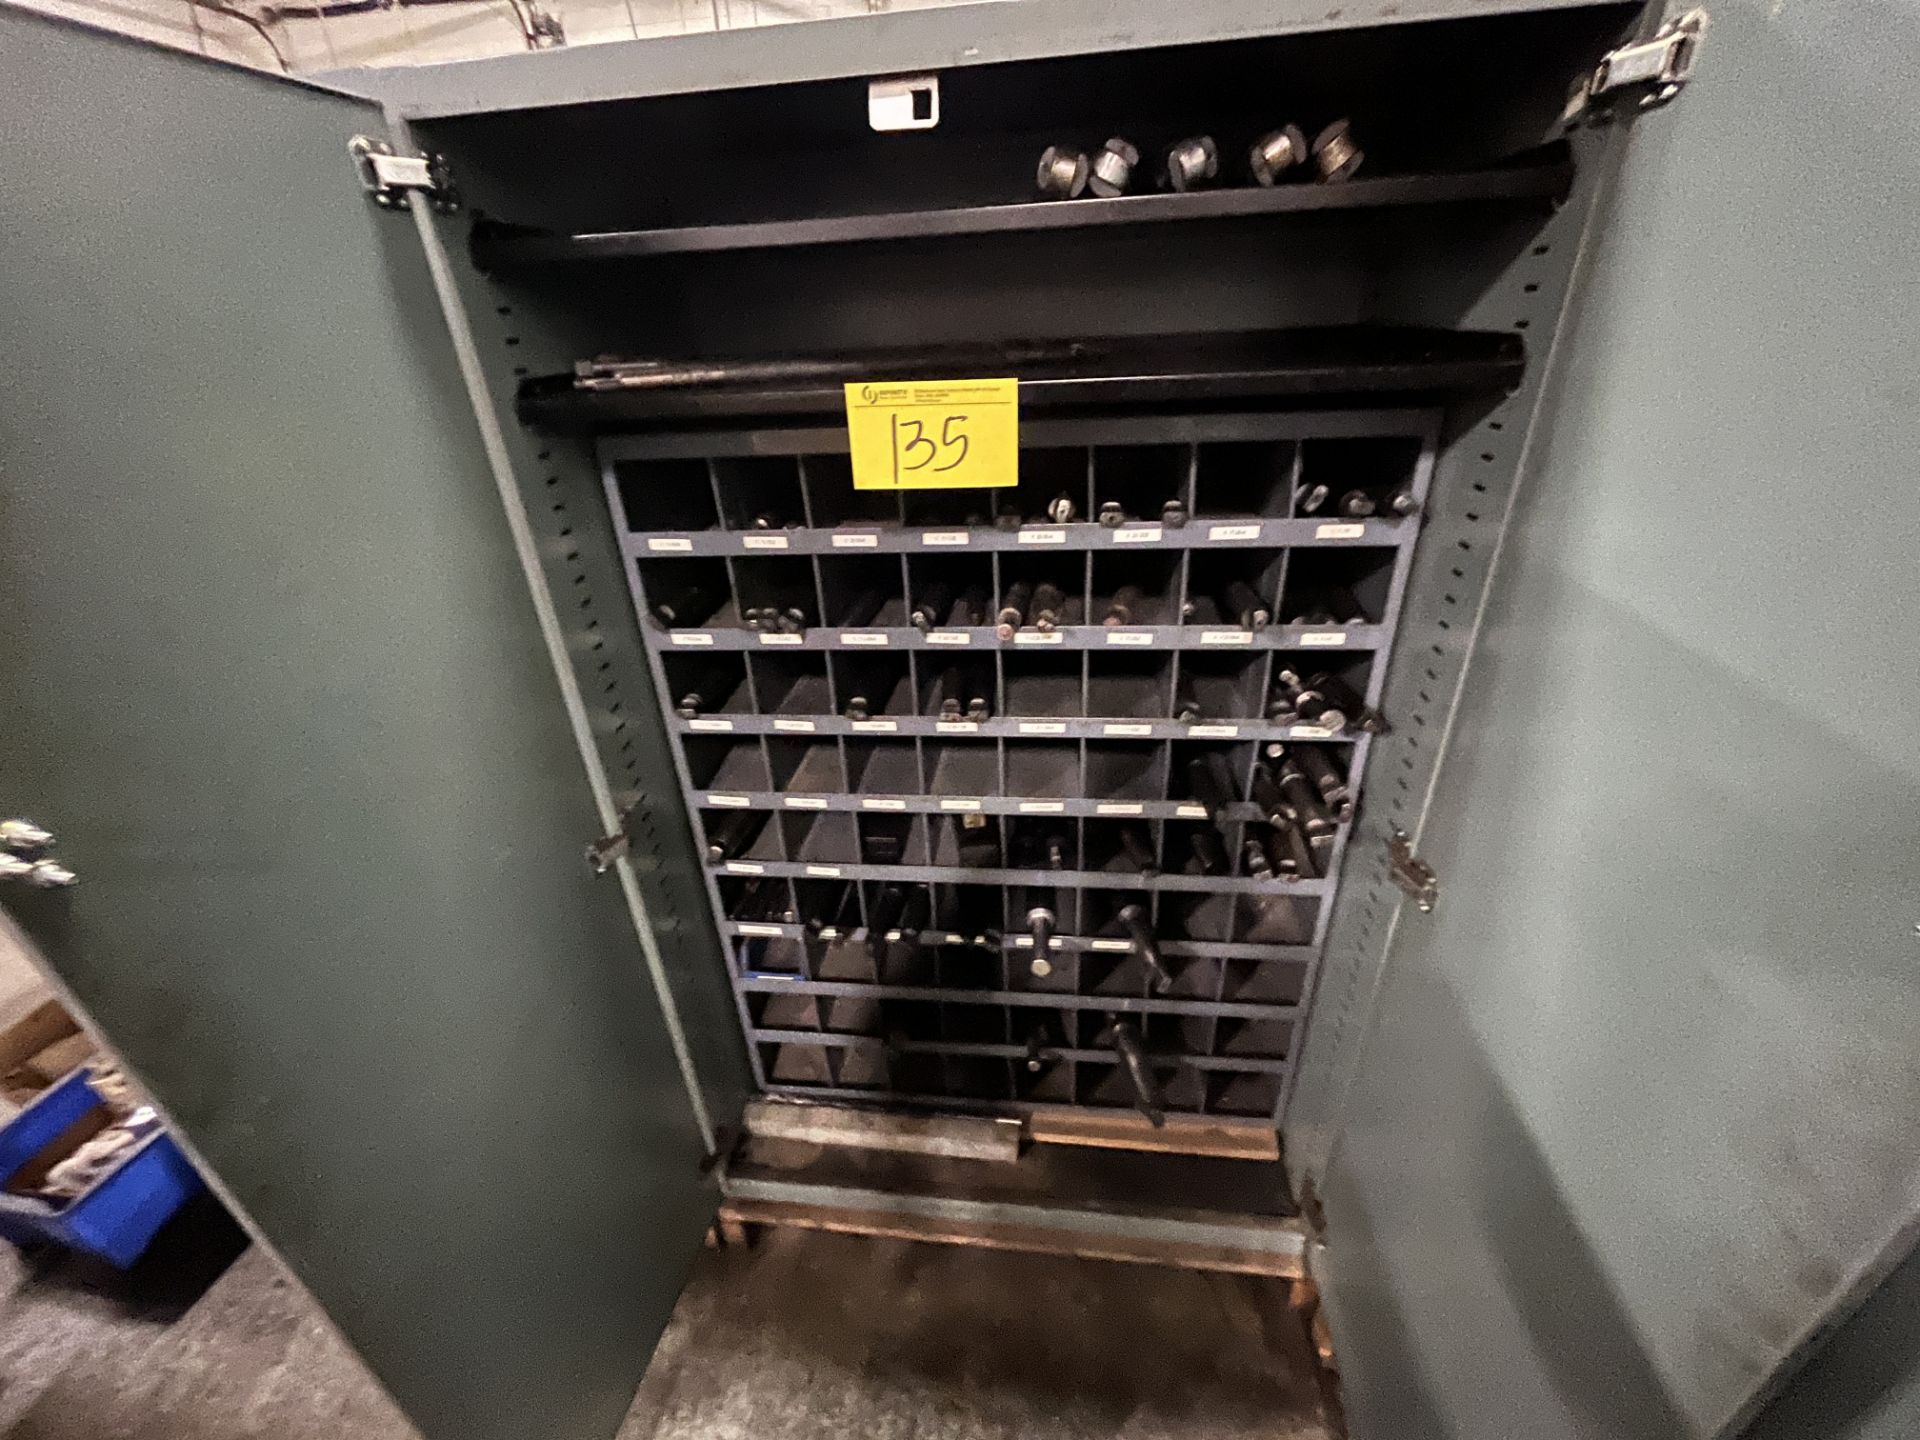 SUNAR HAUSERMAN TOOL CABINET W/ 72-SLOT PIGEON HOLE CABINET, CONTENTS, DRILL BITS, ETC.